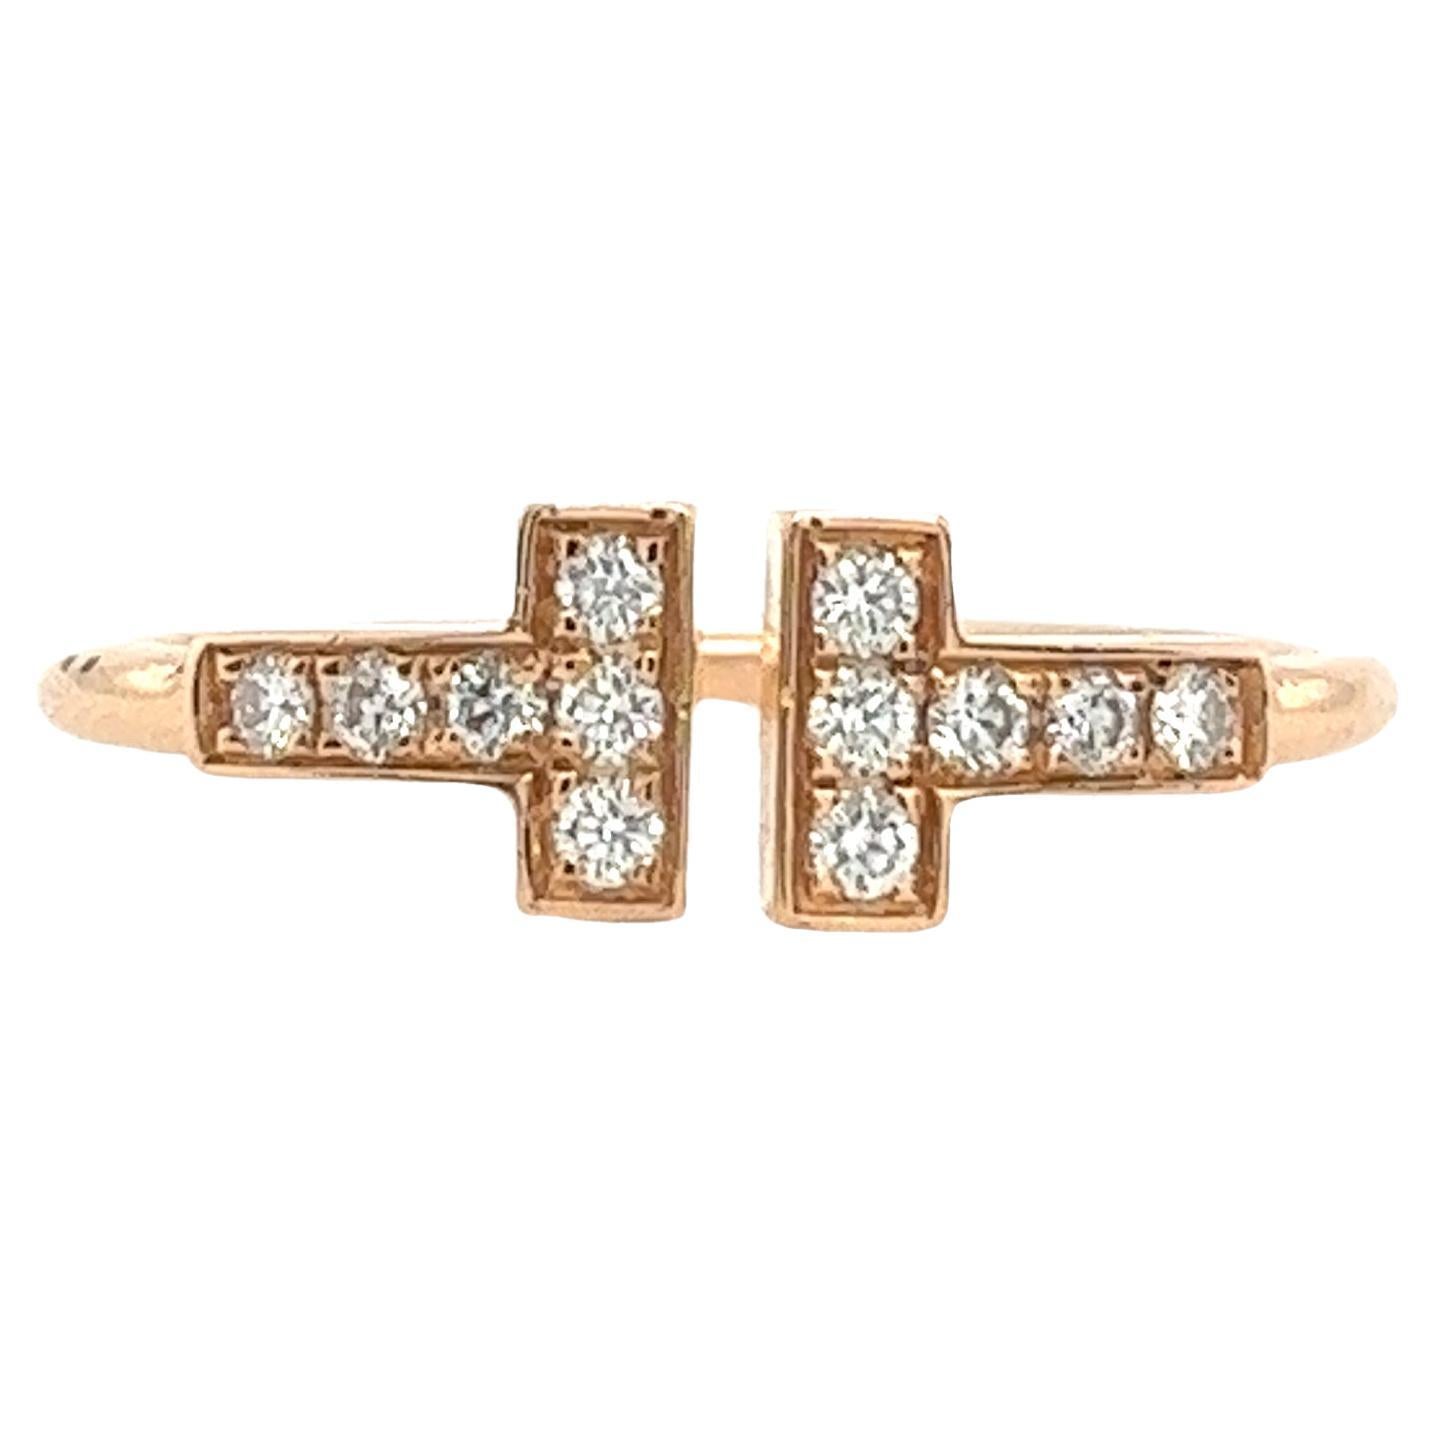 Tiffany & Co Diamond Wire Ring in 18ct Rose Gold